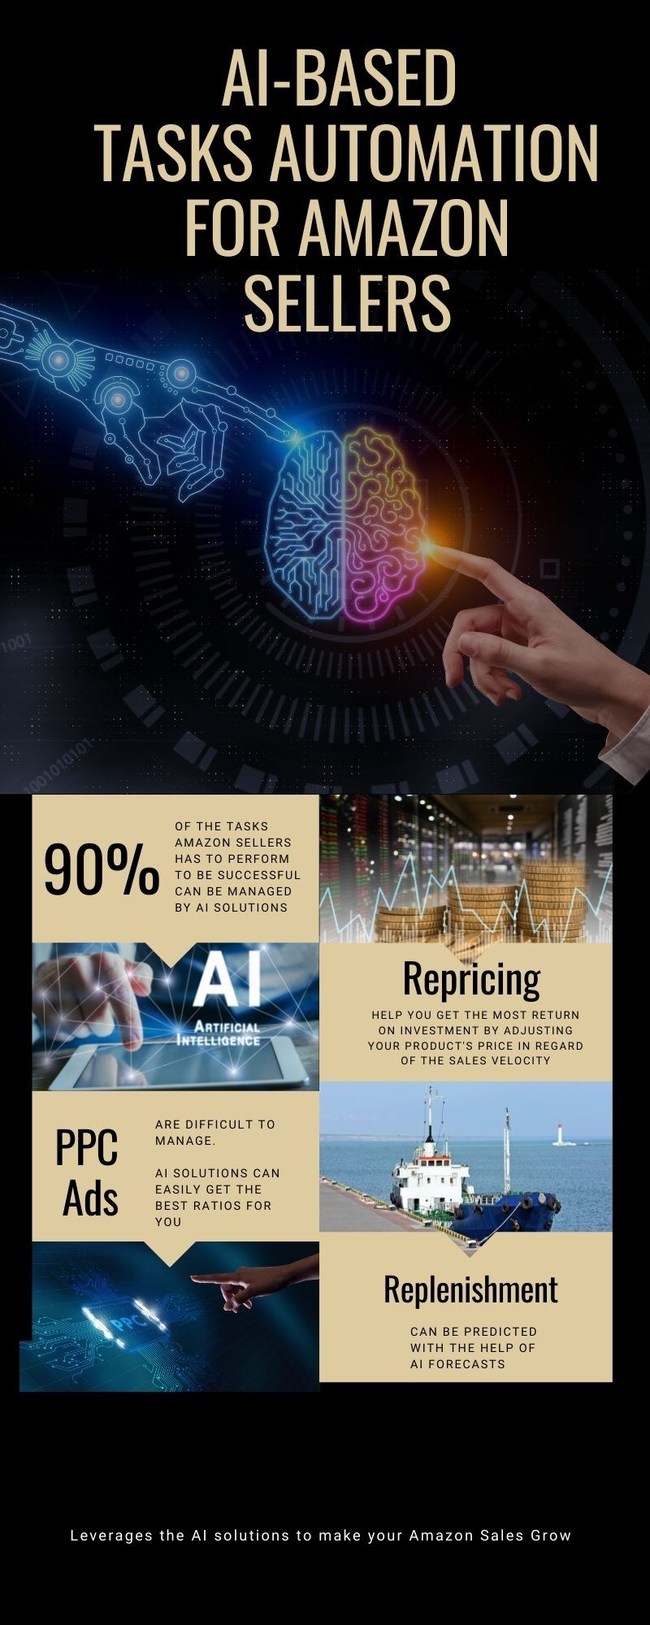 Custom Reporting powered by AI Solutions